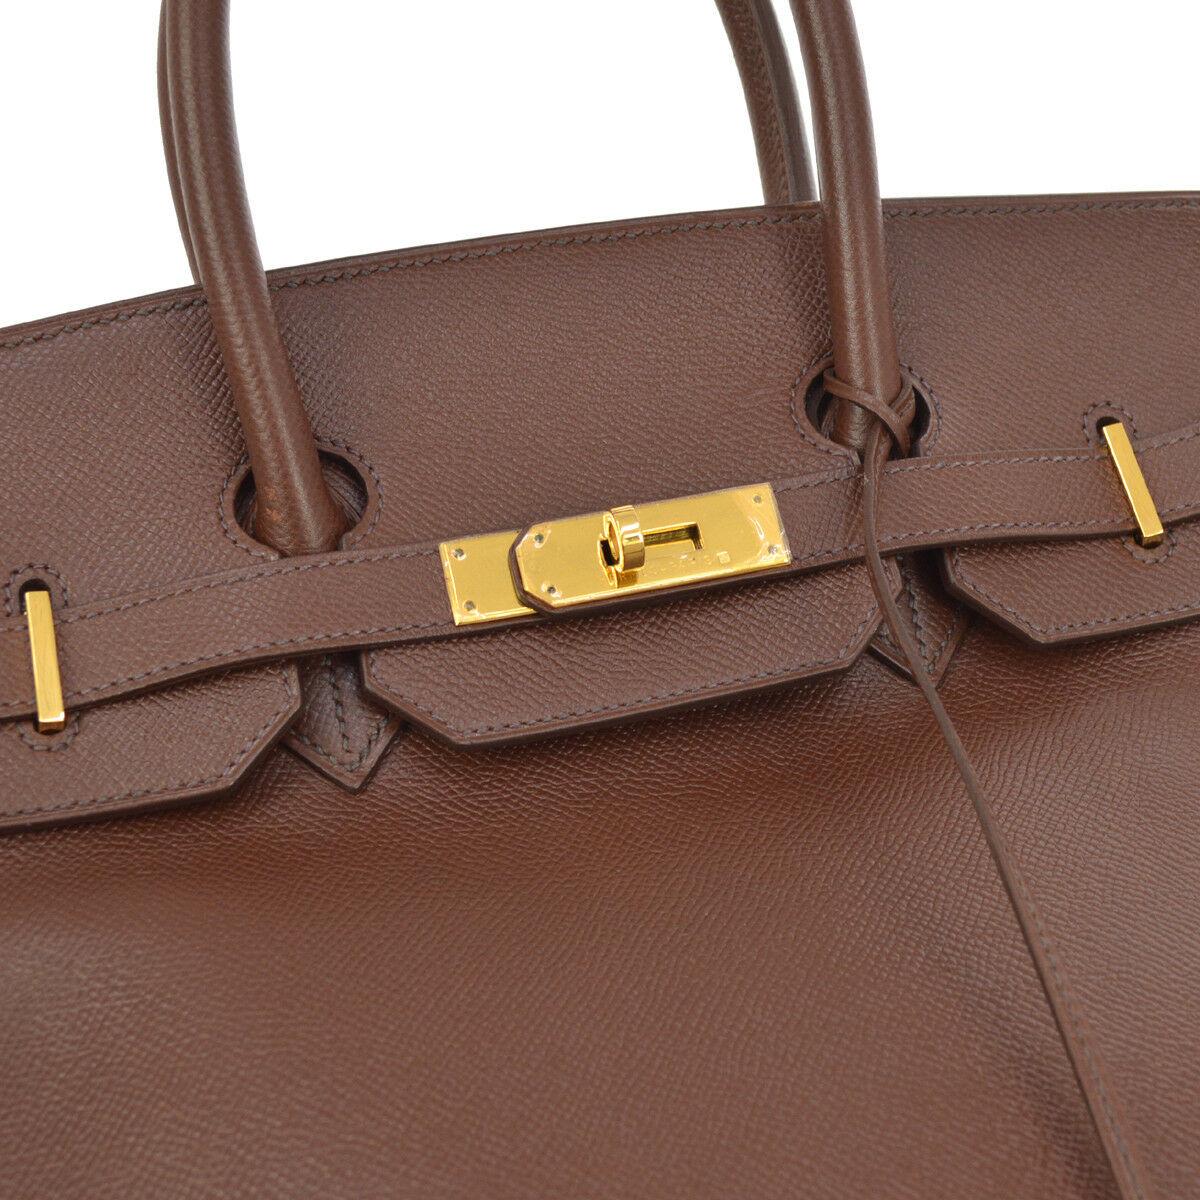 Hermes Birkin 35 Brown Leather Gold Top Handle Satchel Travel Tote Bag

Togo Leather
Gold tone hardware
Leather lining
Date code present
Made in France
Handle drop 4